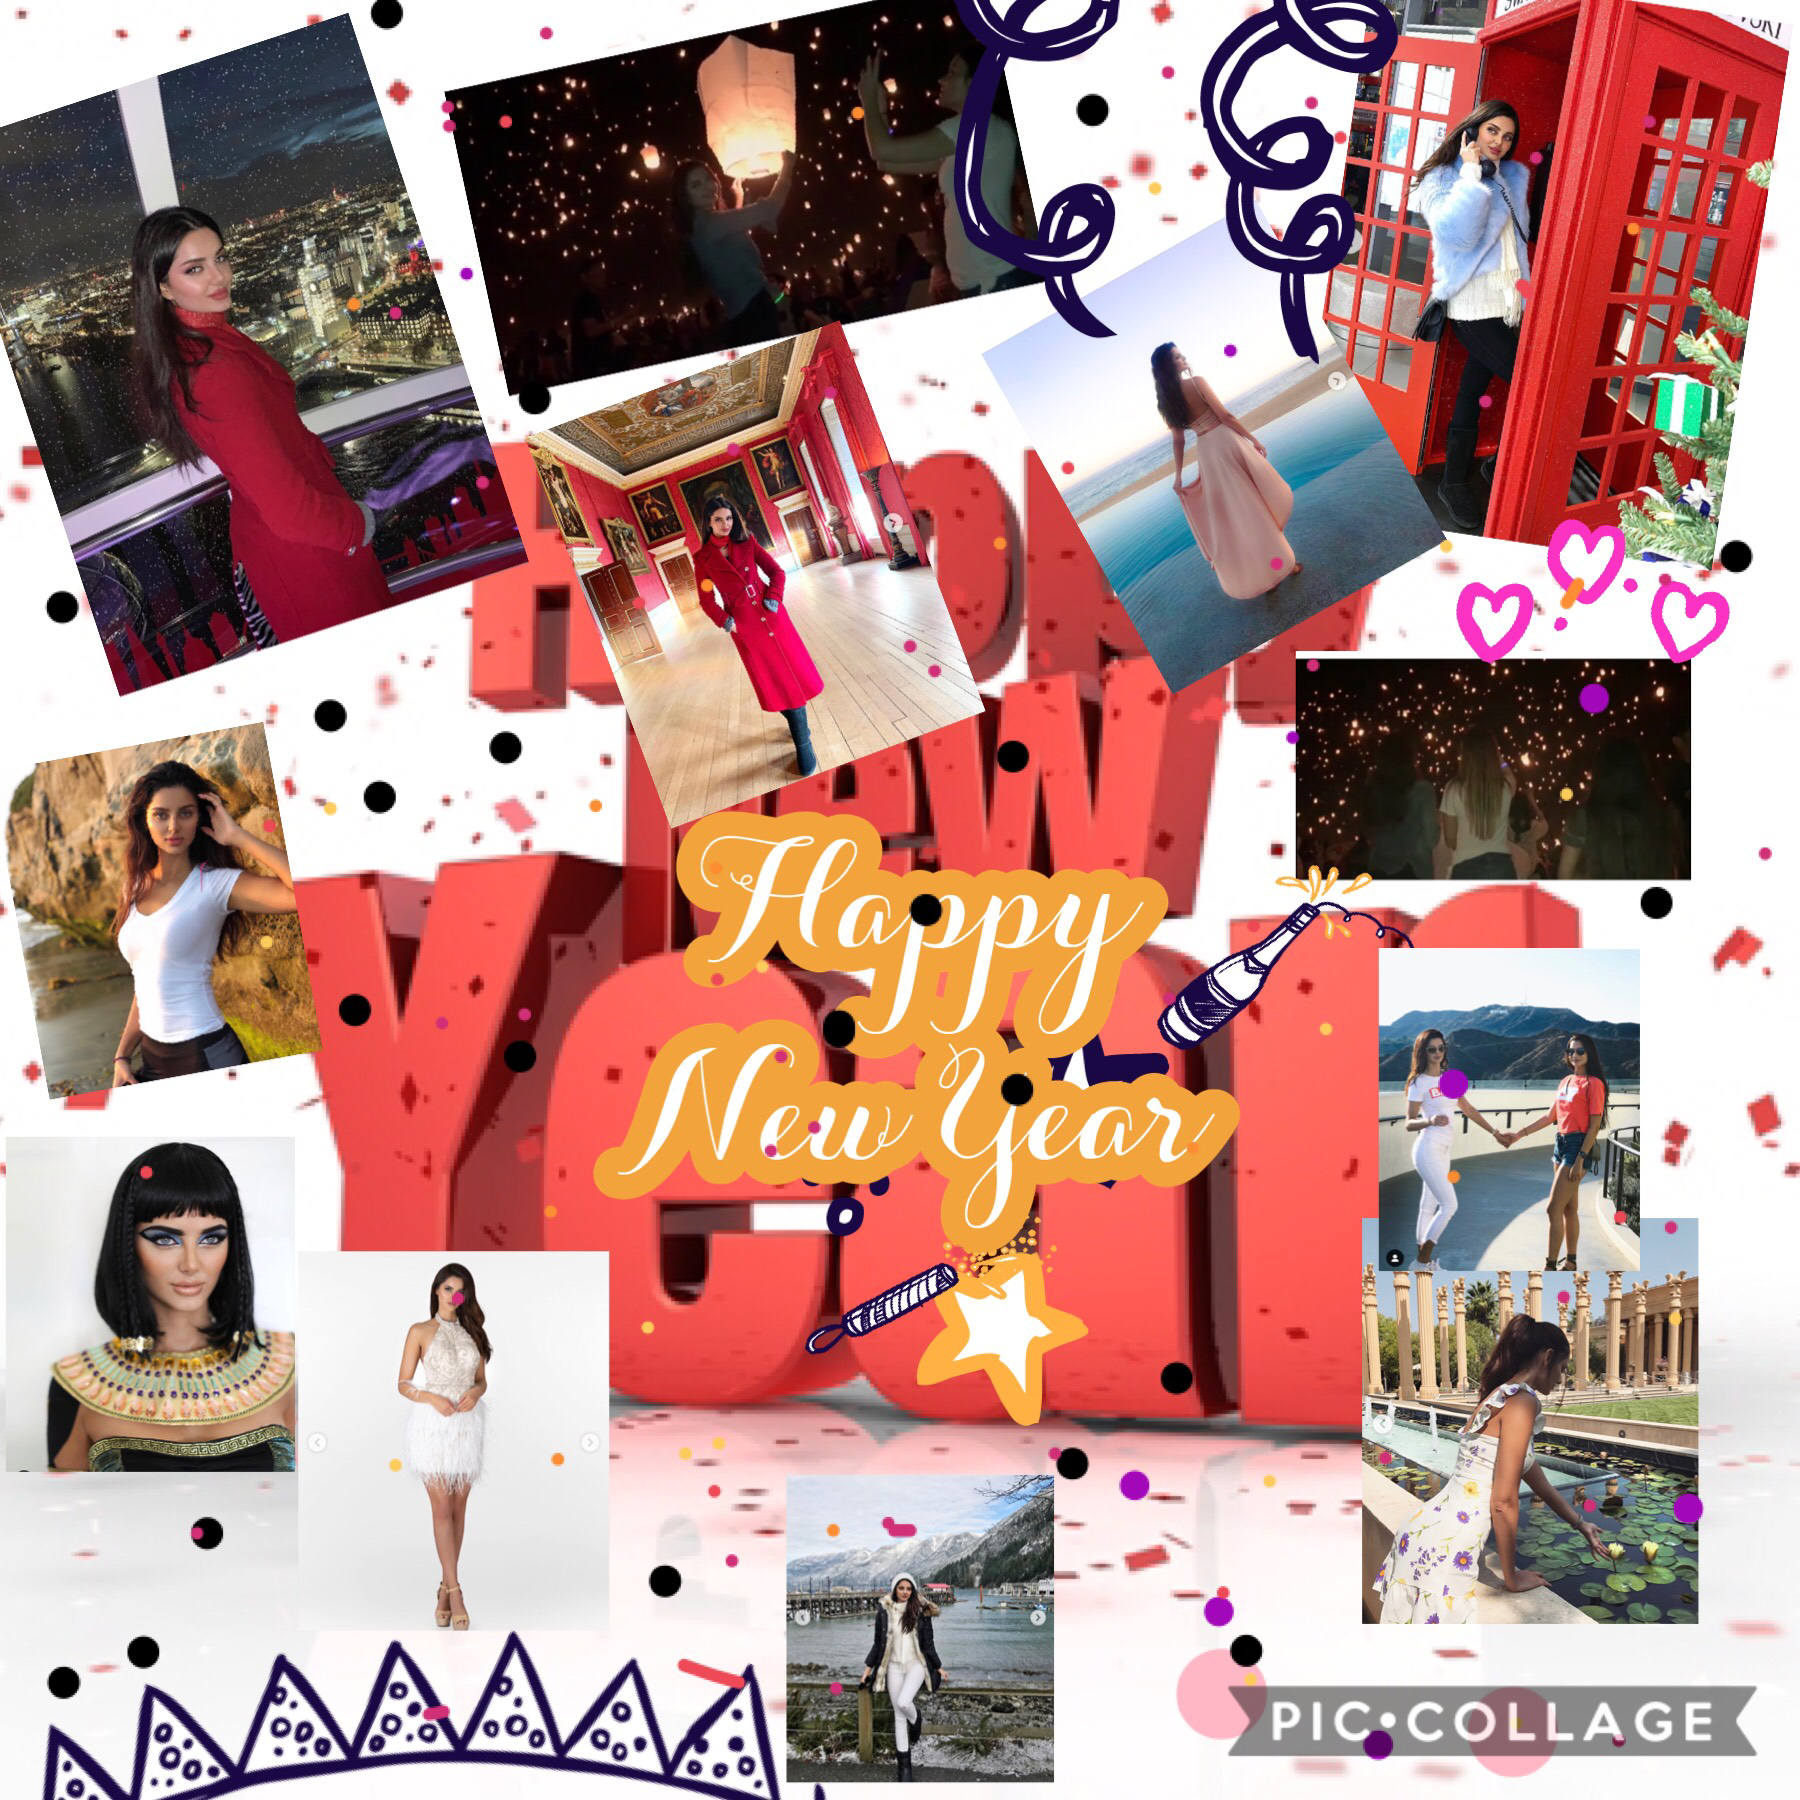 👑Tap👑
This year had been such an adventure 
Hopefully 2019 is the Same but more fun
Happy New Year 🎈 everyone 